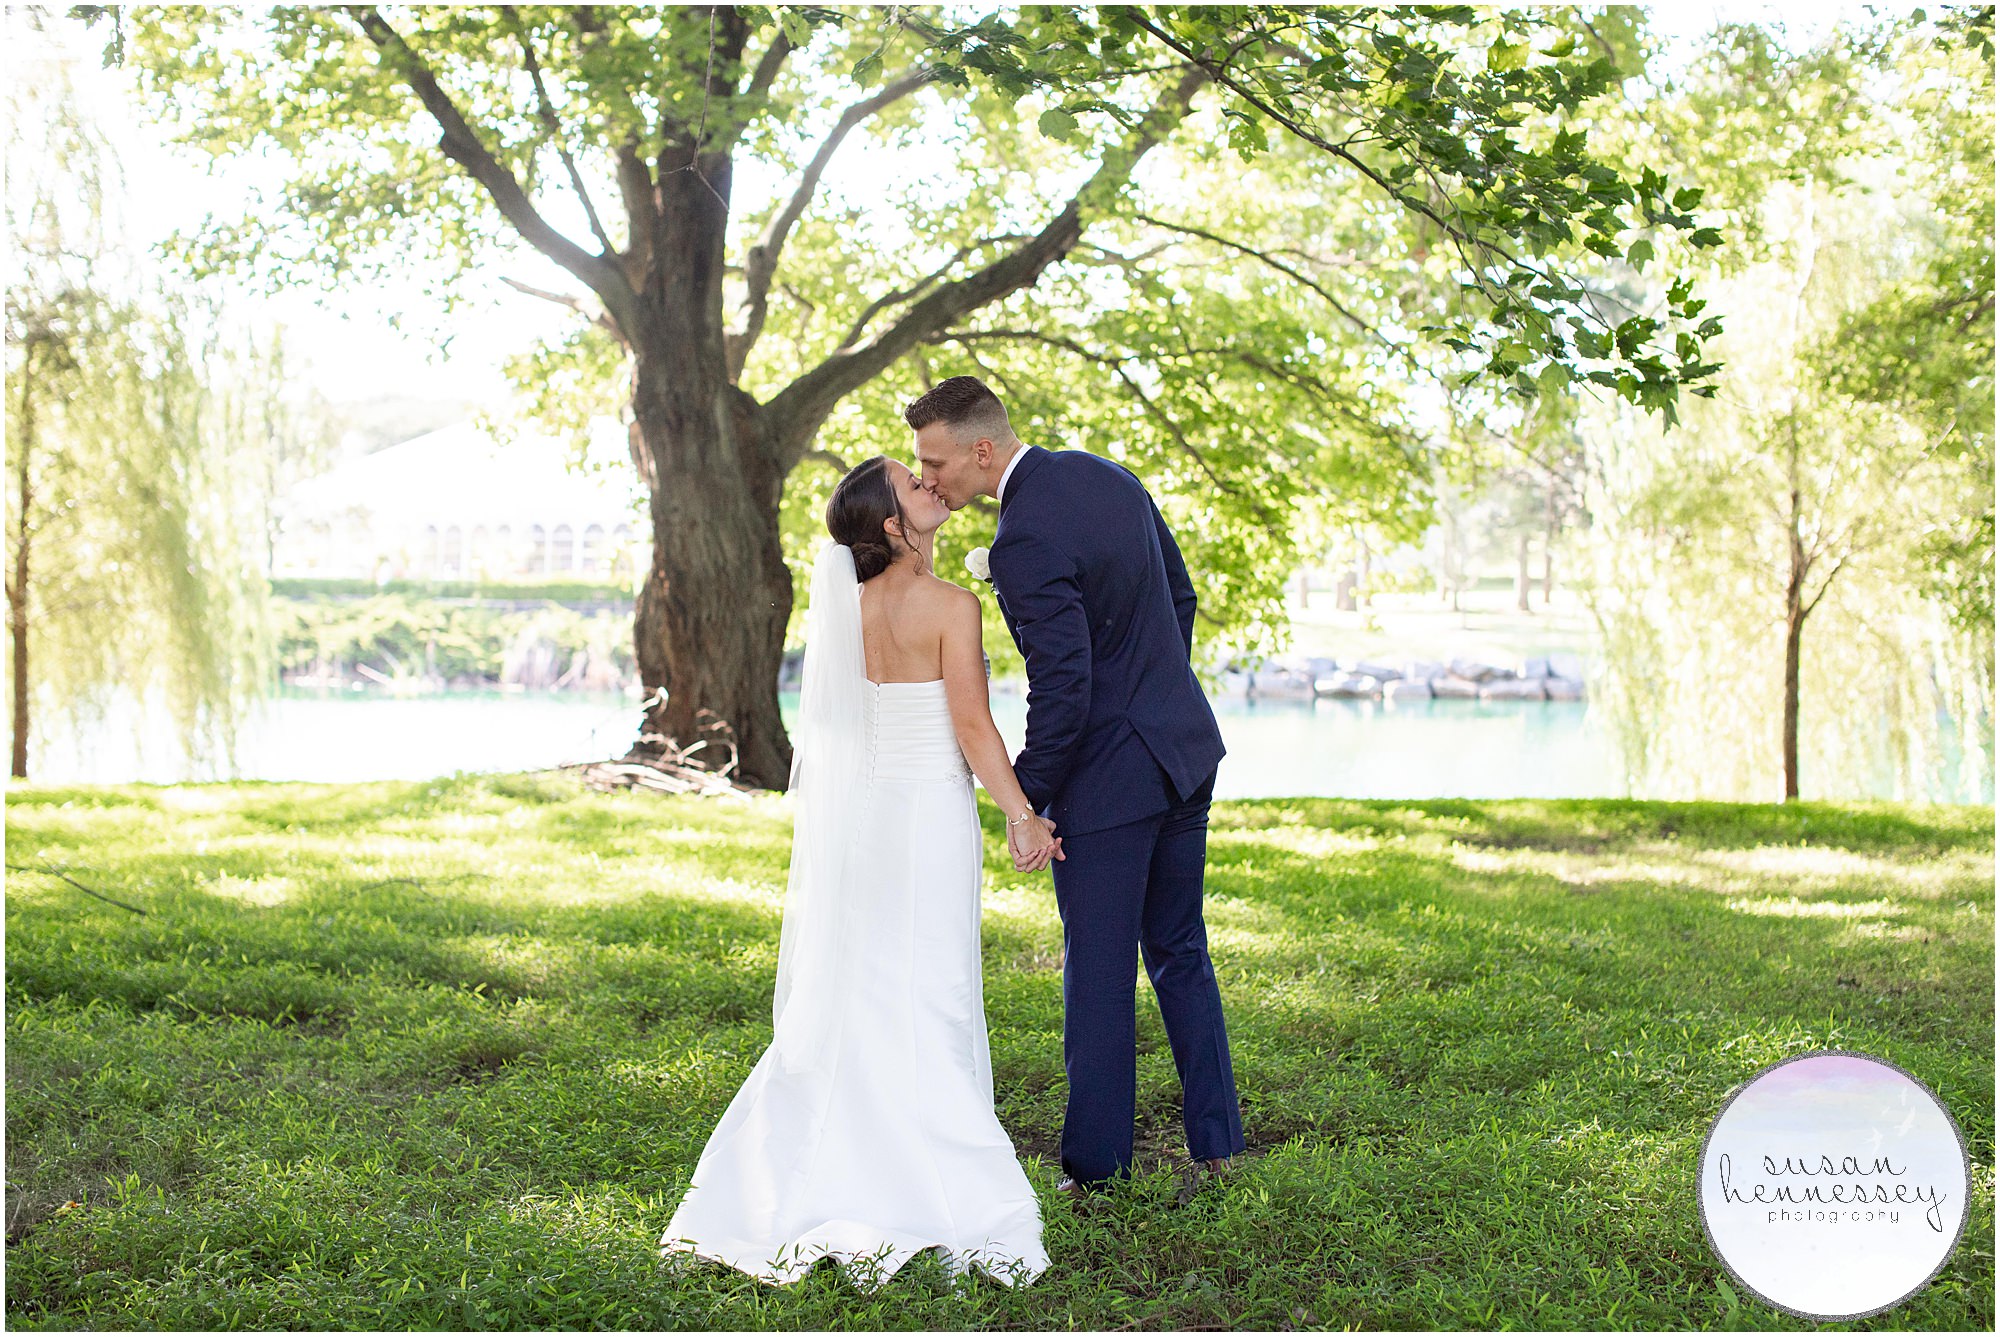 A bride and groom at their romantic lake wedding in central NJ